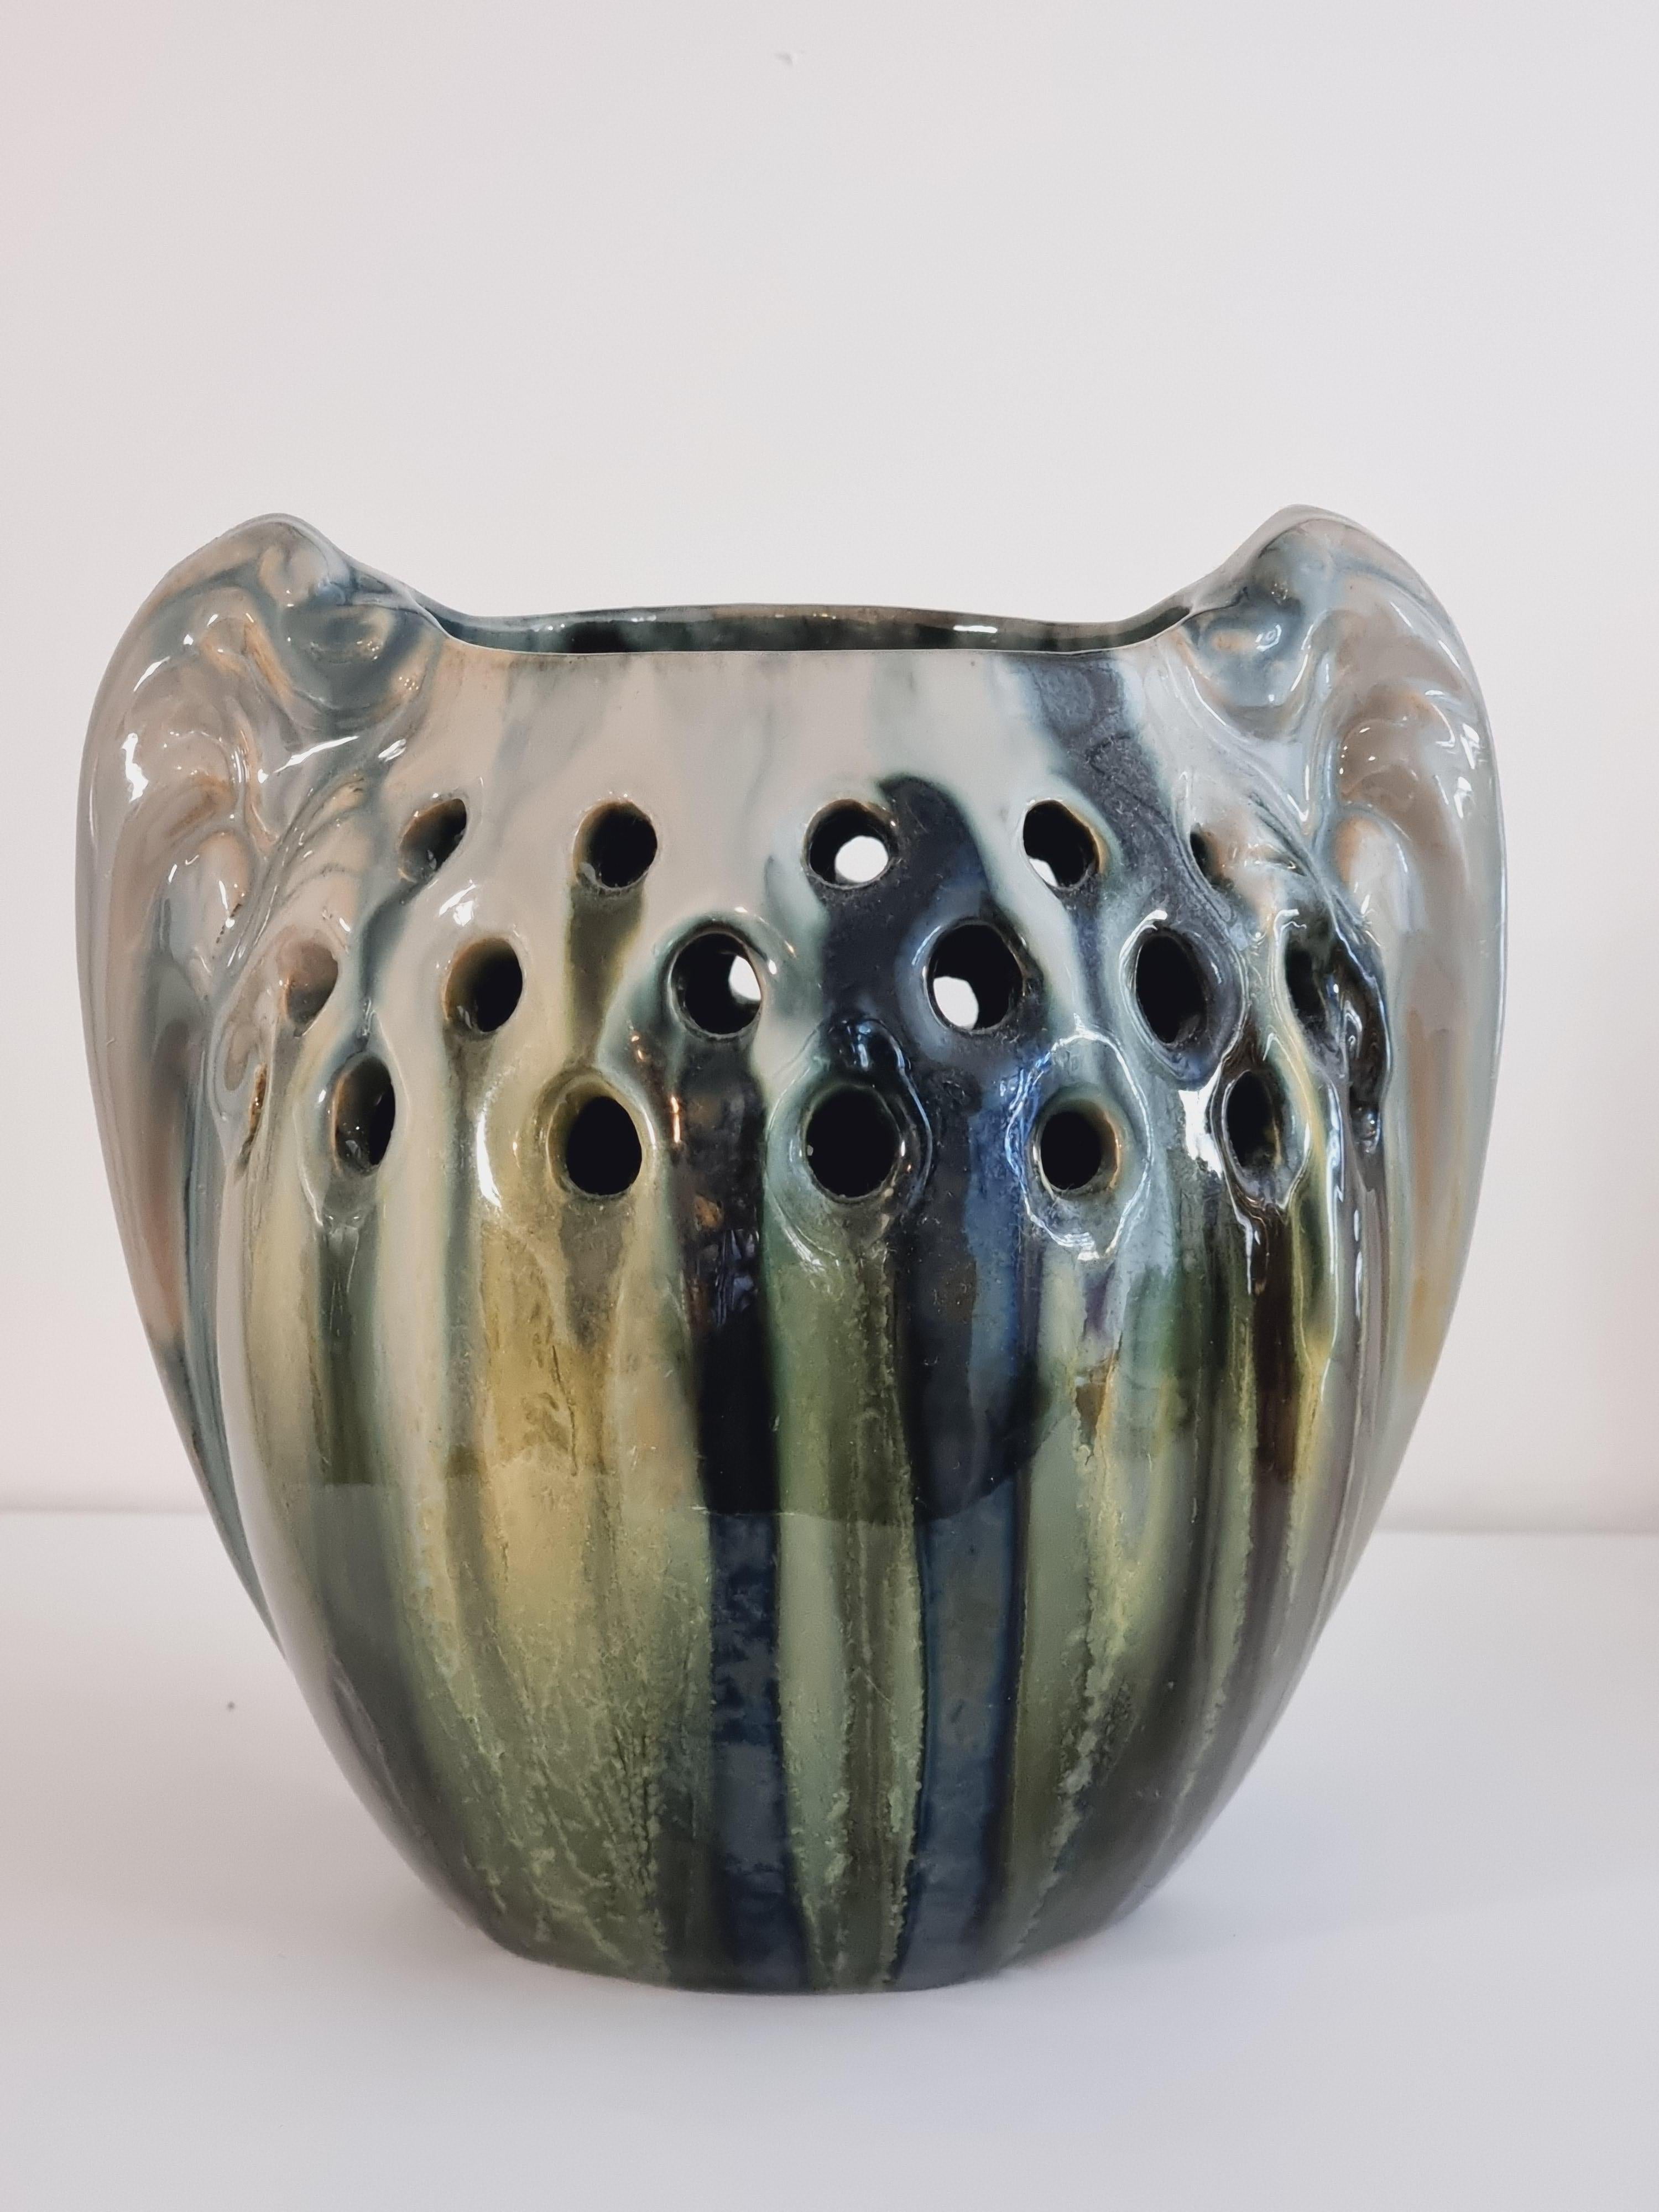 Rare, decorative vase by Michael Andersen & Son (MA&S) with beautiful glaze in different colors (yellow, green, grey..) flows down the rounded shape. 

The upper part has decorative shapes of perforation/holes and the sides has beautiful winged